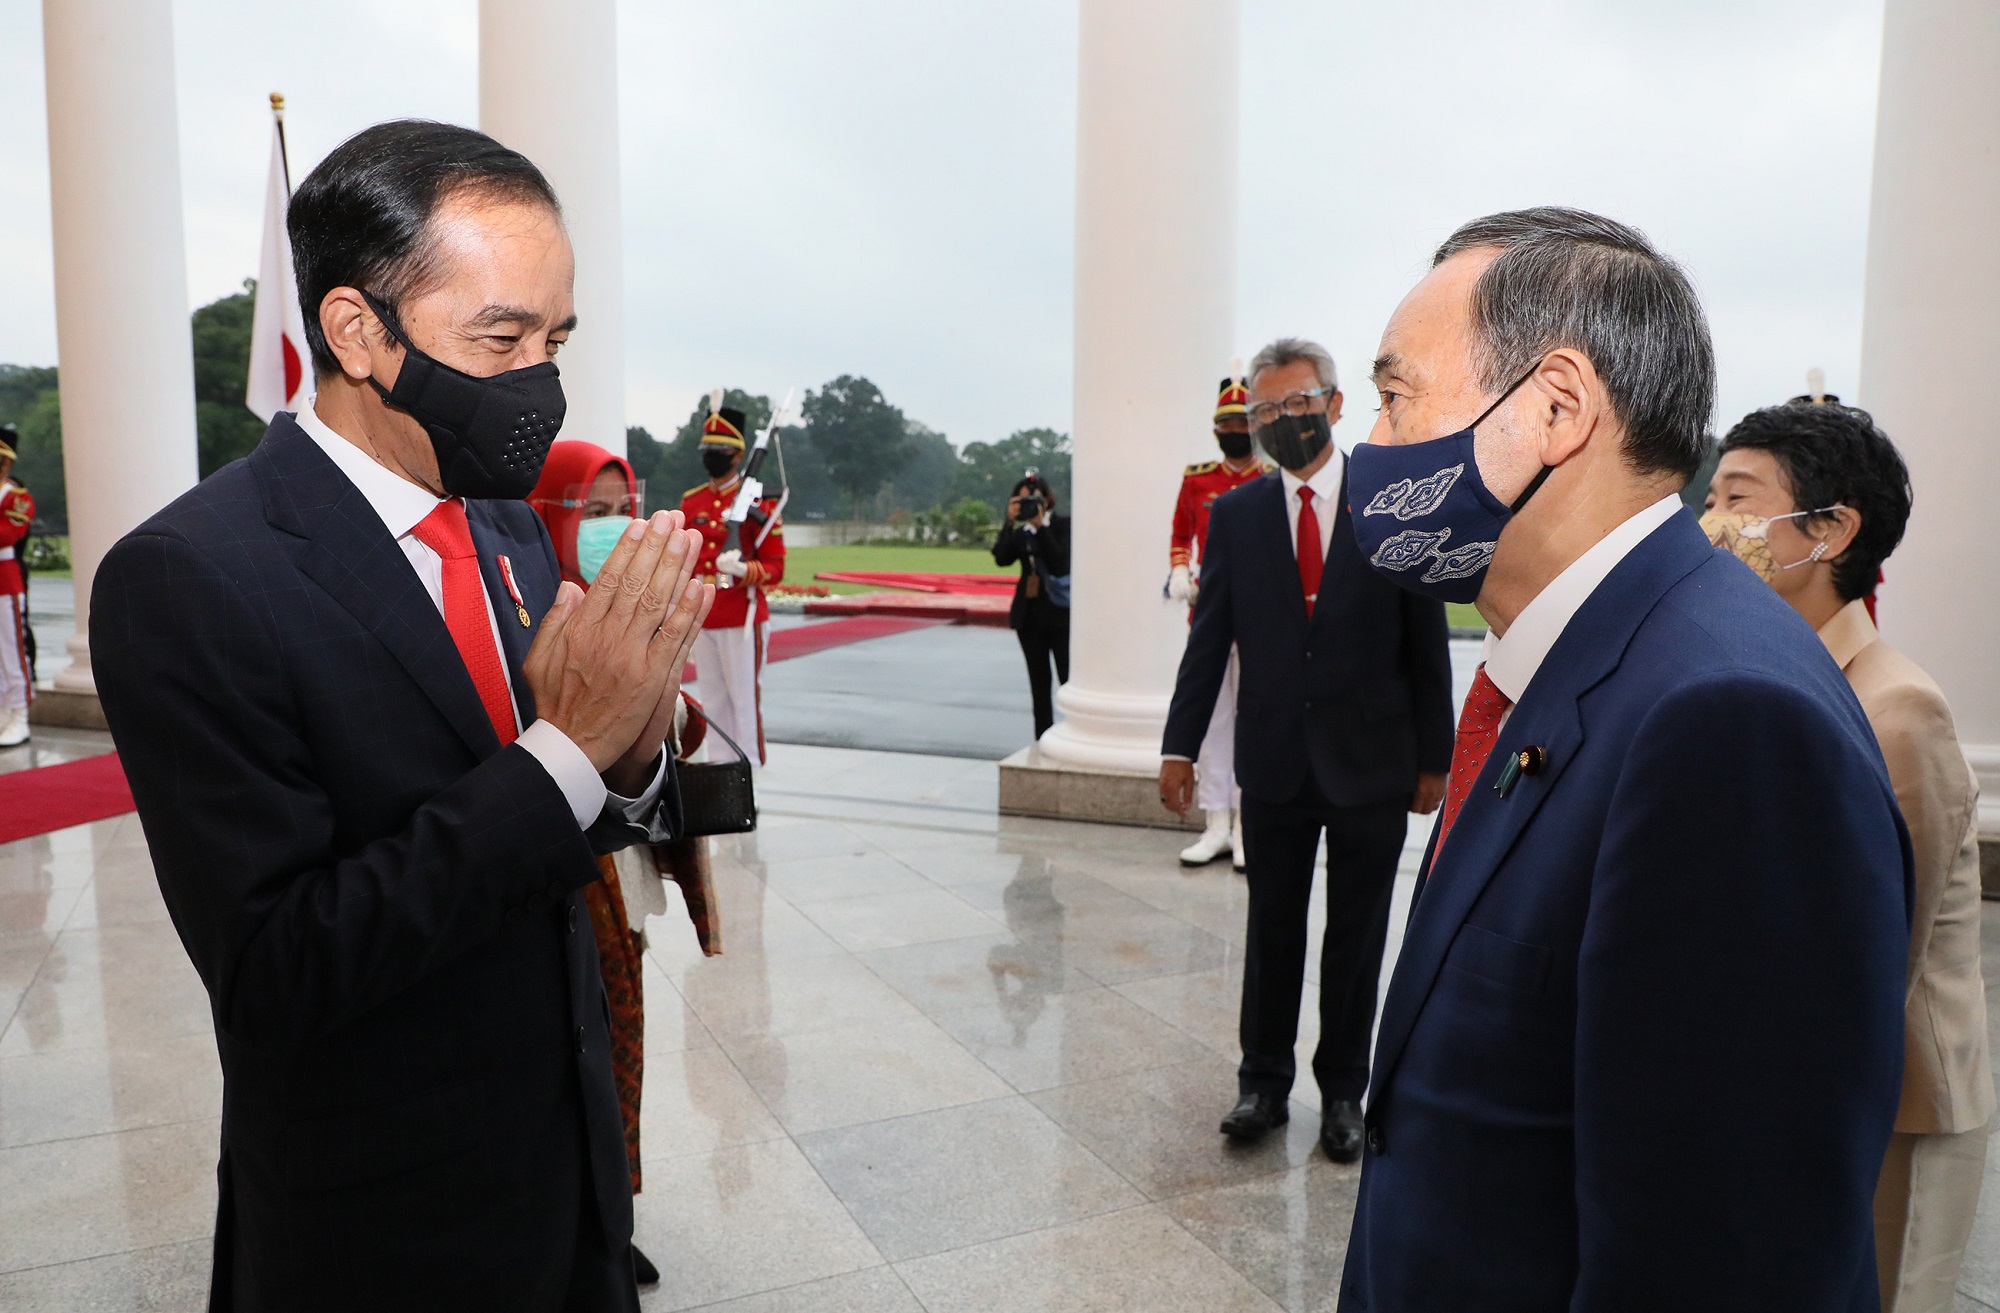 Photograph of the Prime Minister being welcomed by the President of Indonesia